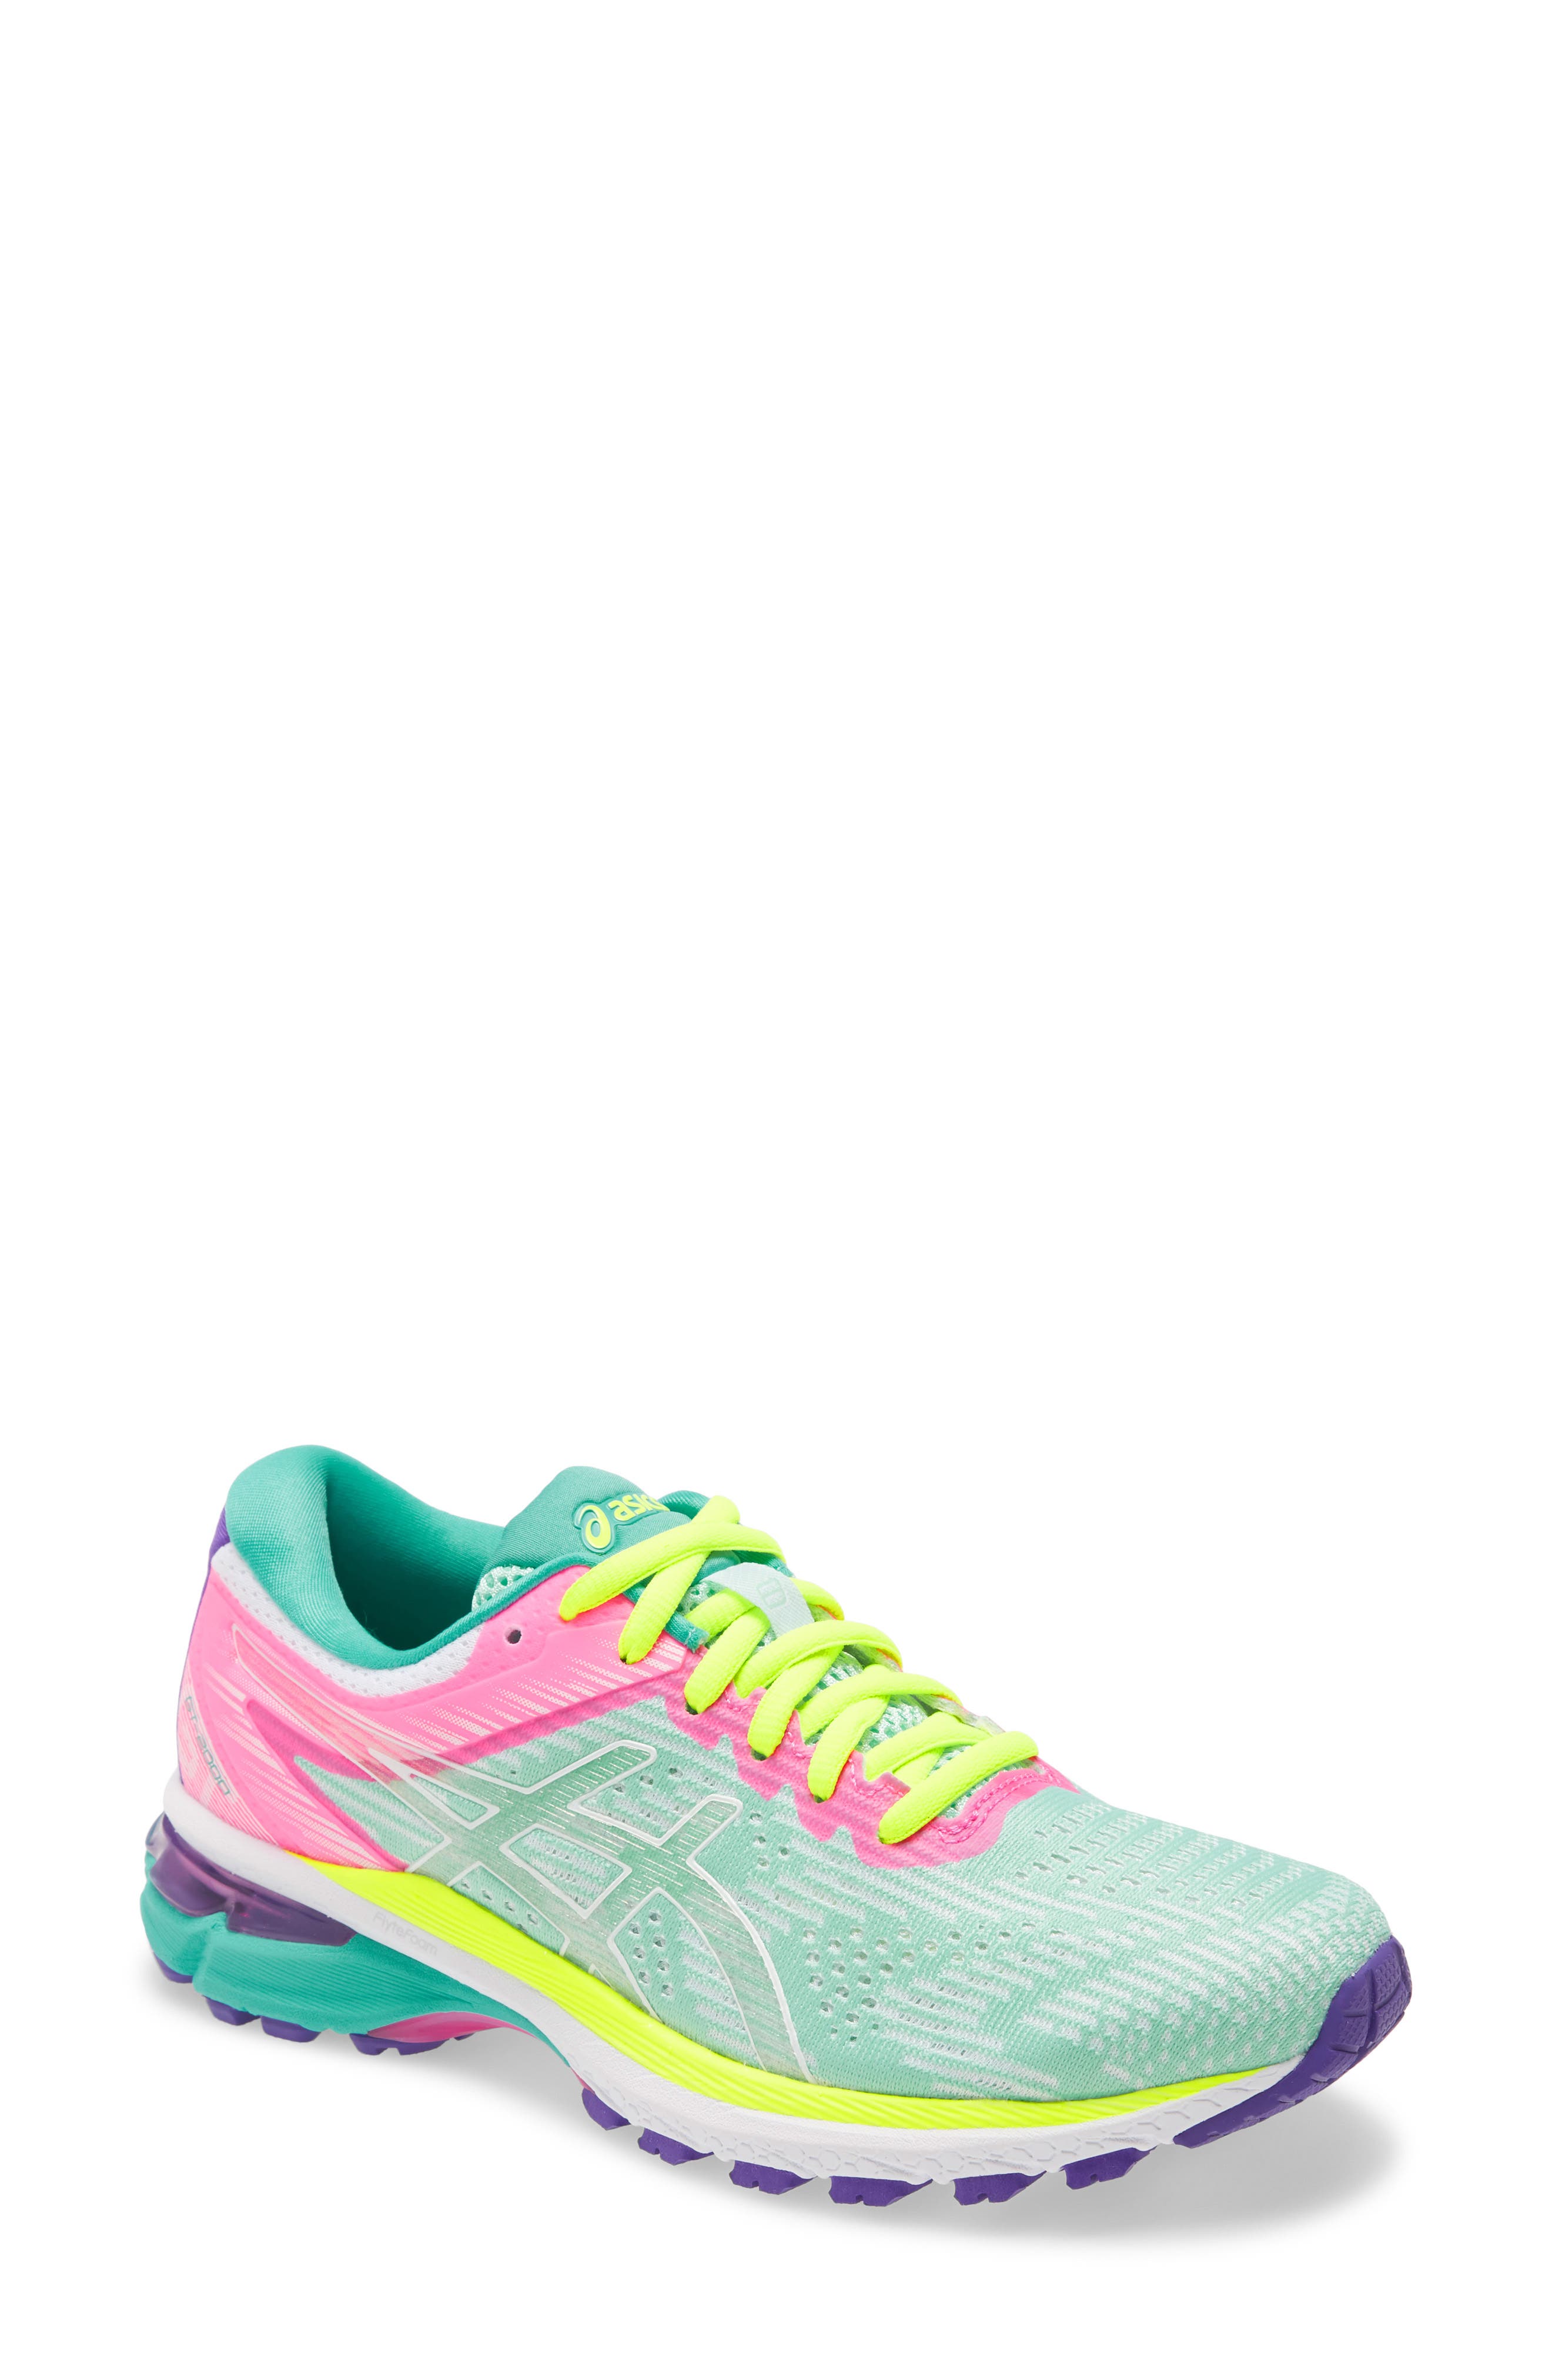 asic walking shoes for womens